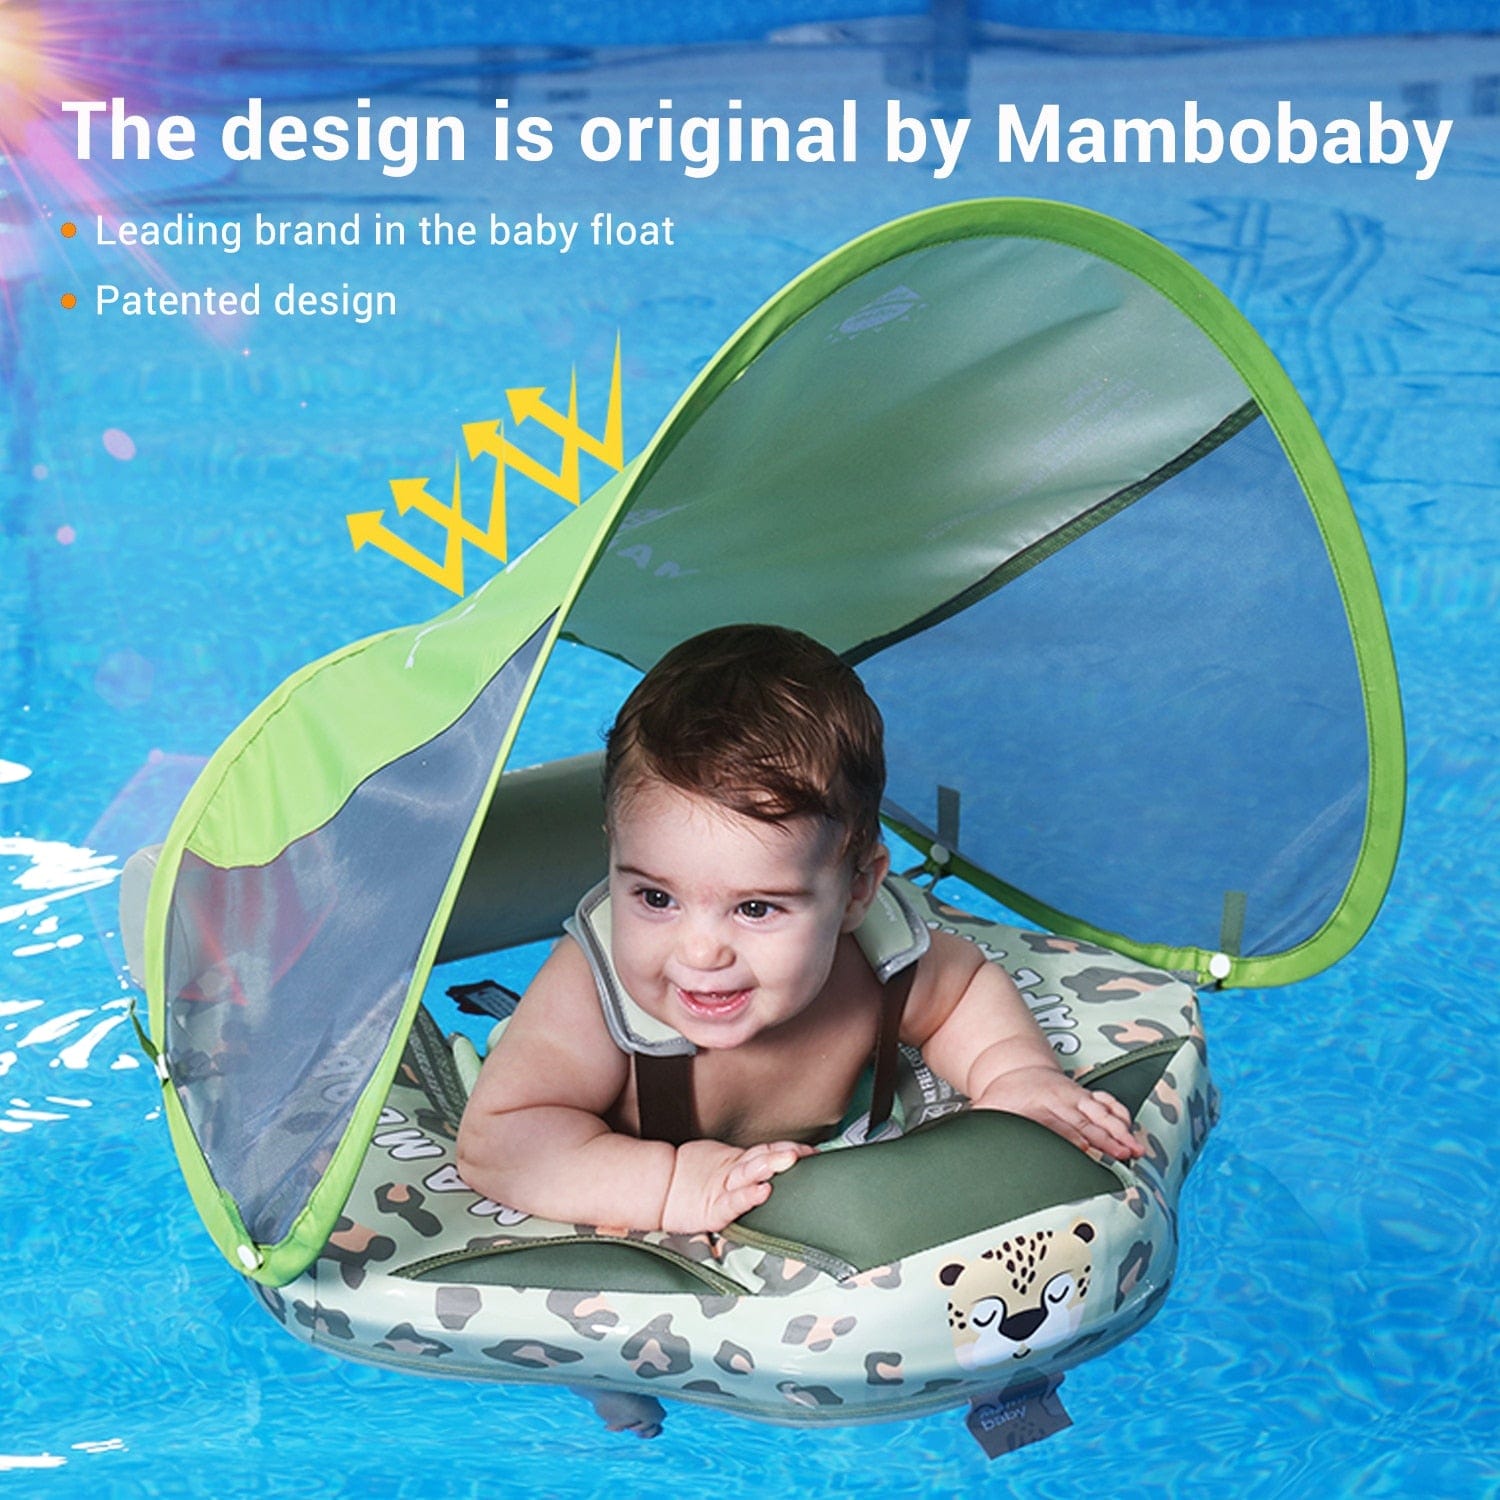 Proactive Baby Mambobaby Non-Inflatable Leopard Design Baby Swim Float with Canopy For 3-24 Month